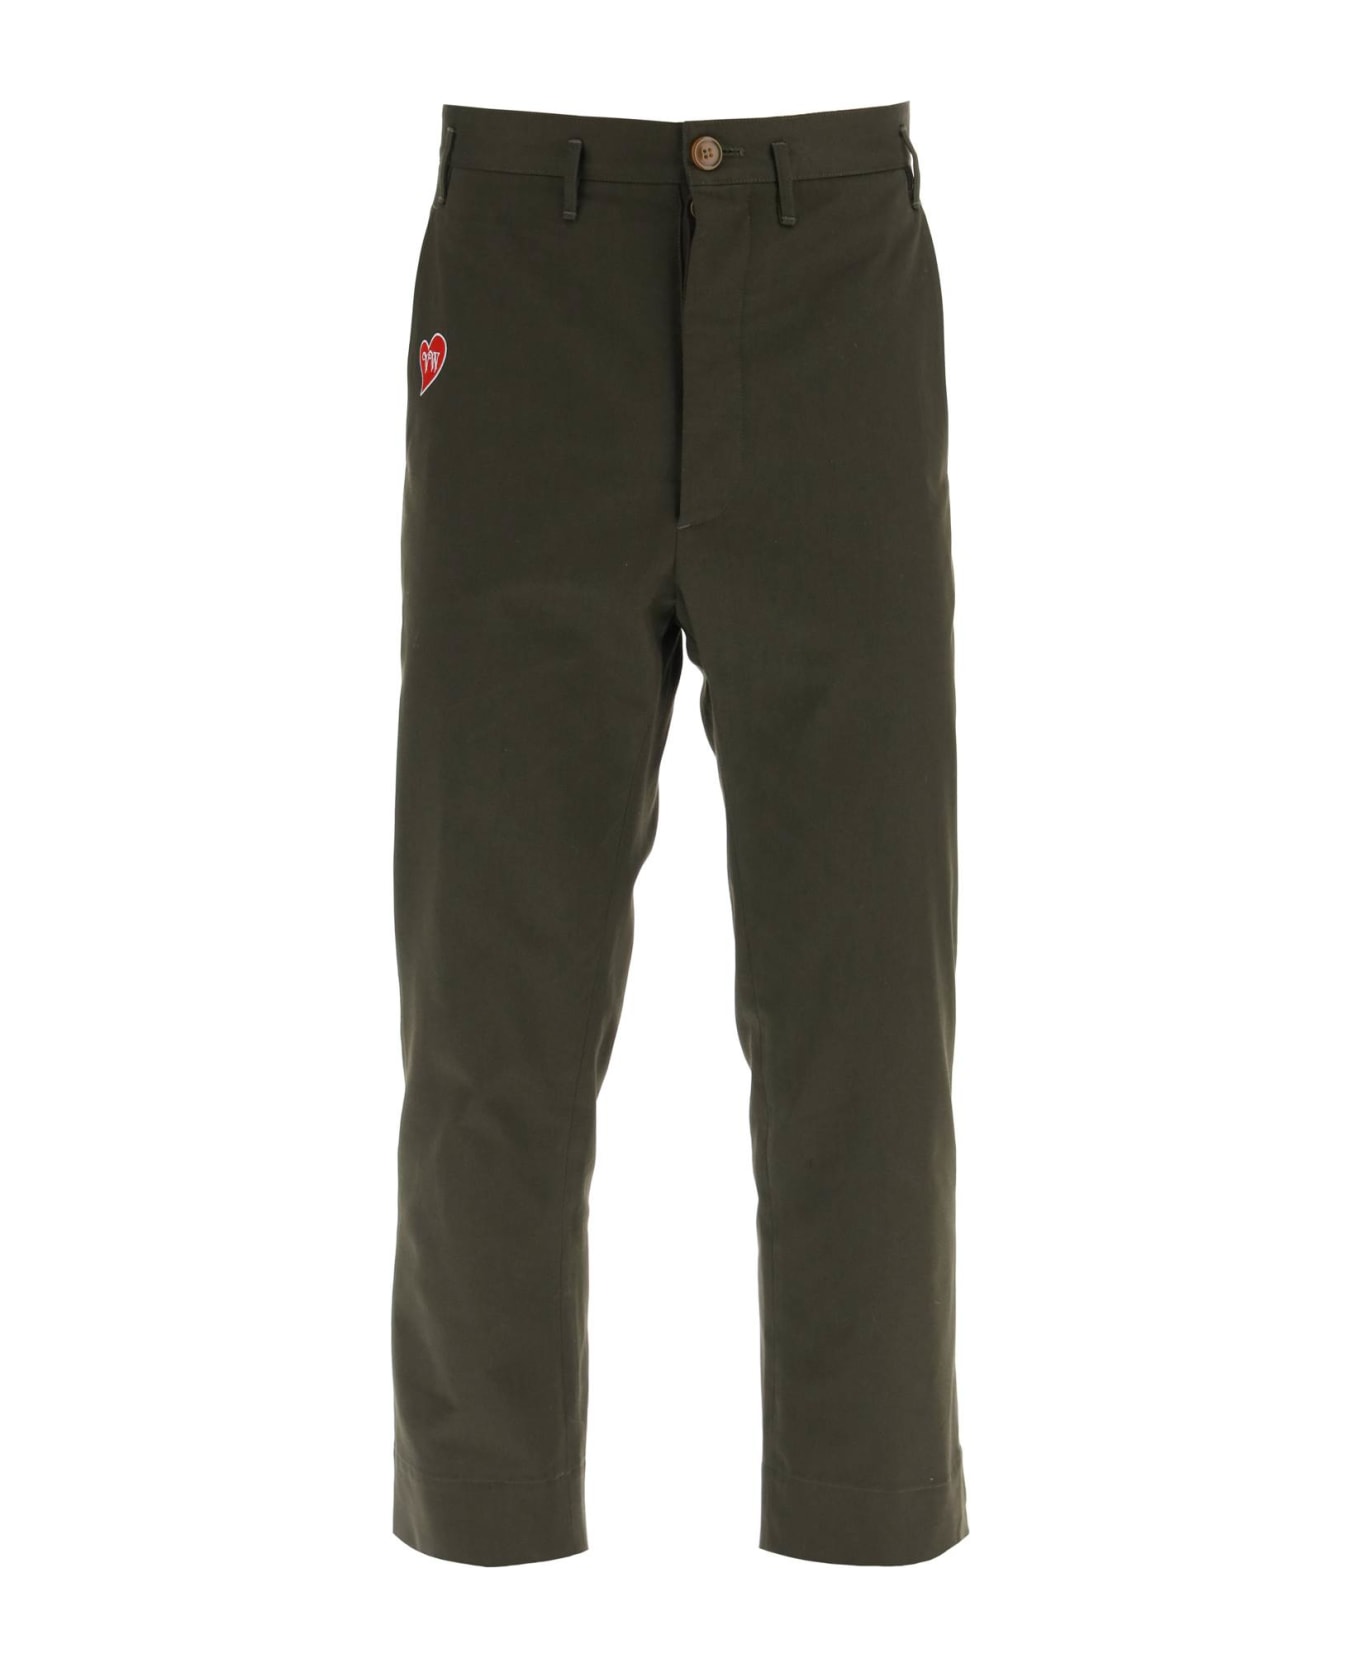 Vivienne Westwood Cropped Cruise Pants Featuring Embroidered Heart-shaped Logo - MILITARY GREEN (Green)